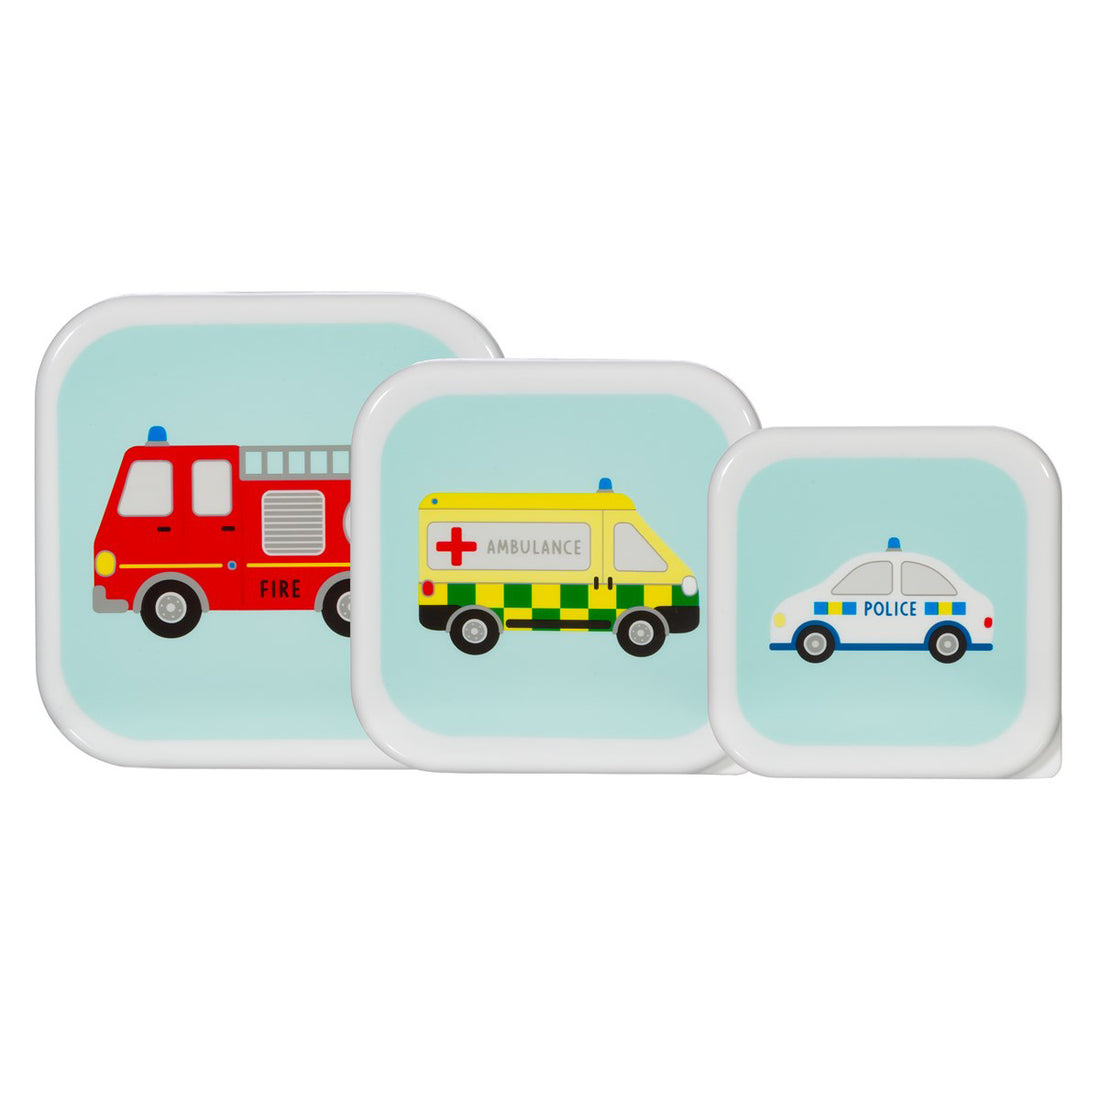 rjb-stone-transport-lunch-boxes-set-of-3-rjbs-maxi062 (3)